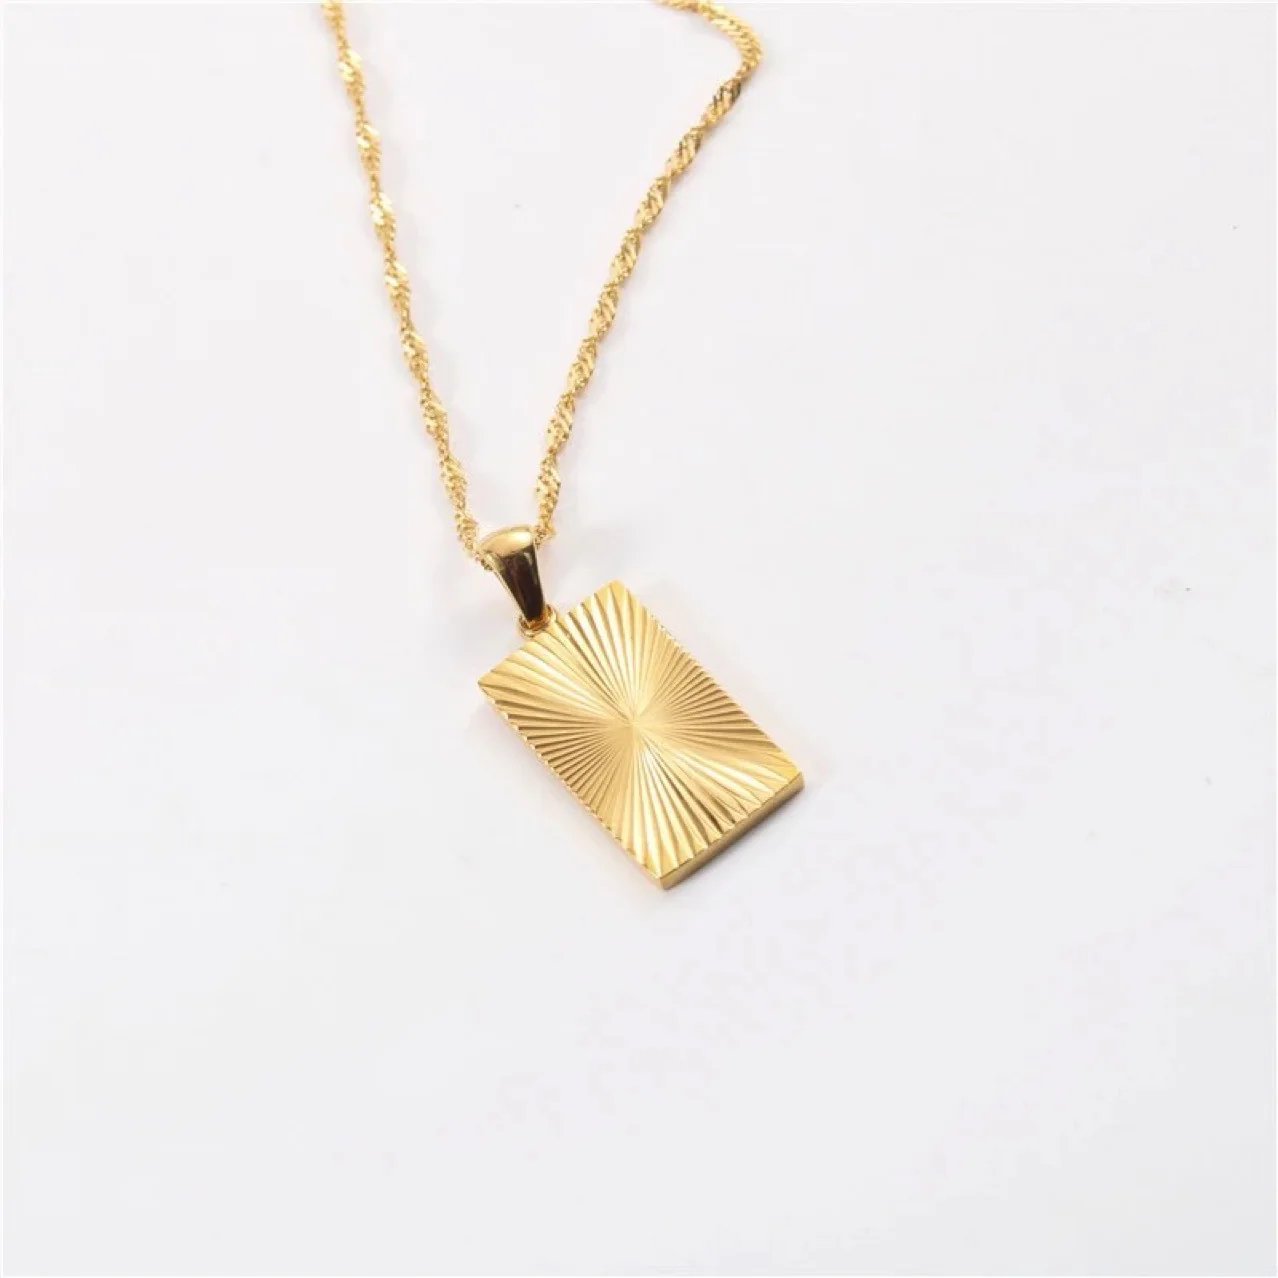 

Jewelry Tarnish Free PVD Gold Plated Sunburst Rectangle Square Pendant Necklace Trendy Necklace